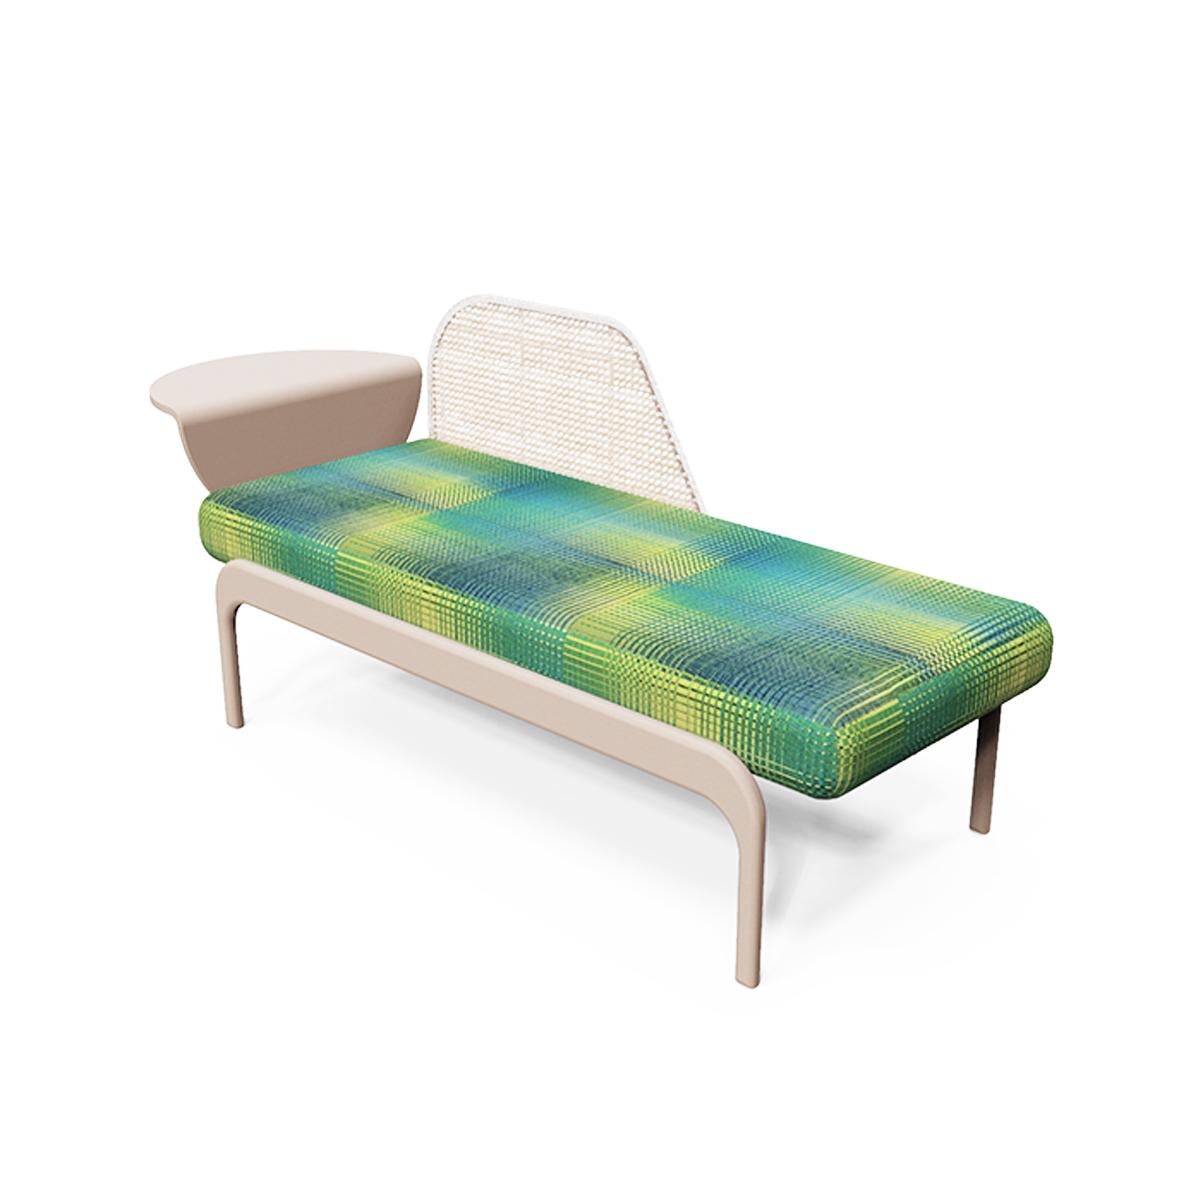 Litza modern silhouette features a woven cane detail in the back, an attached armrest easily used to place your favorite beverage while enjoying a comfortable seat.
Built on a solid wood frame with a rectangular base and four legs with a